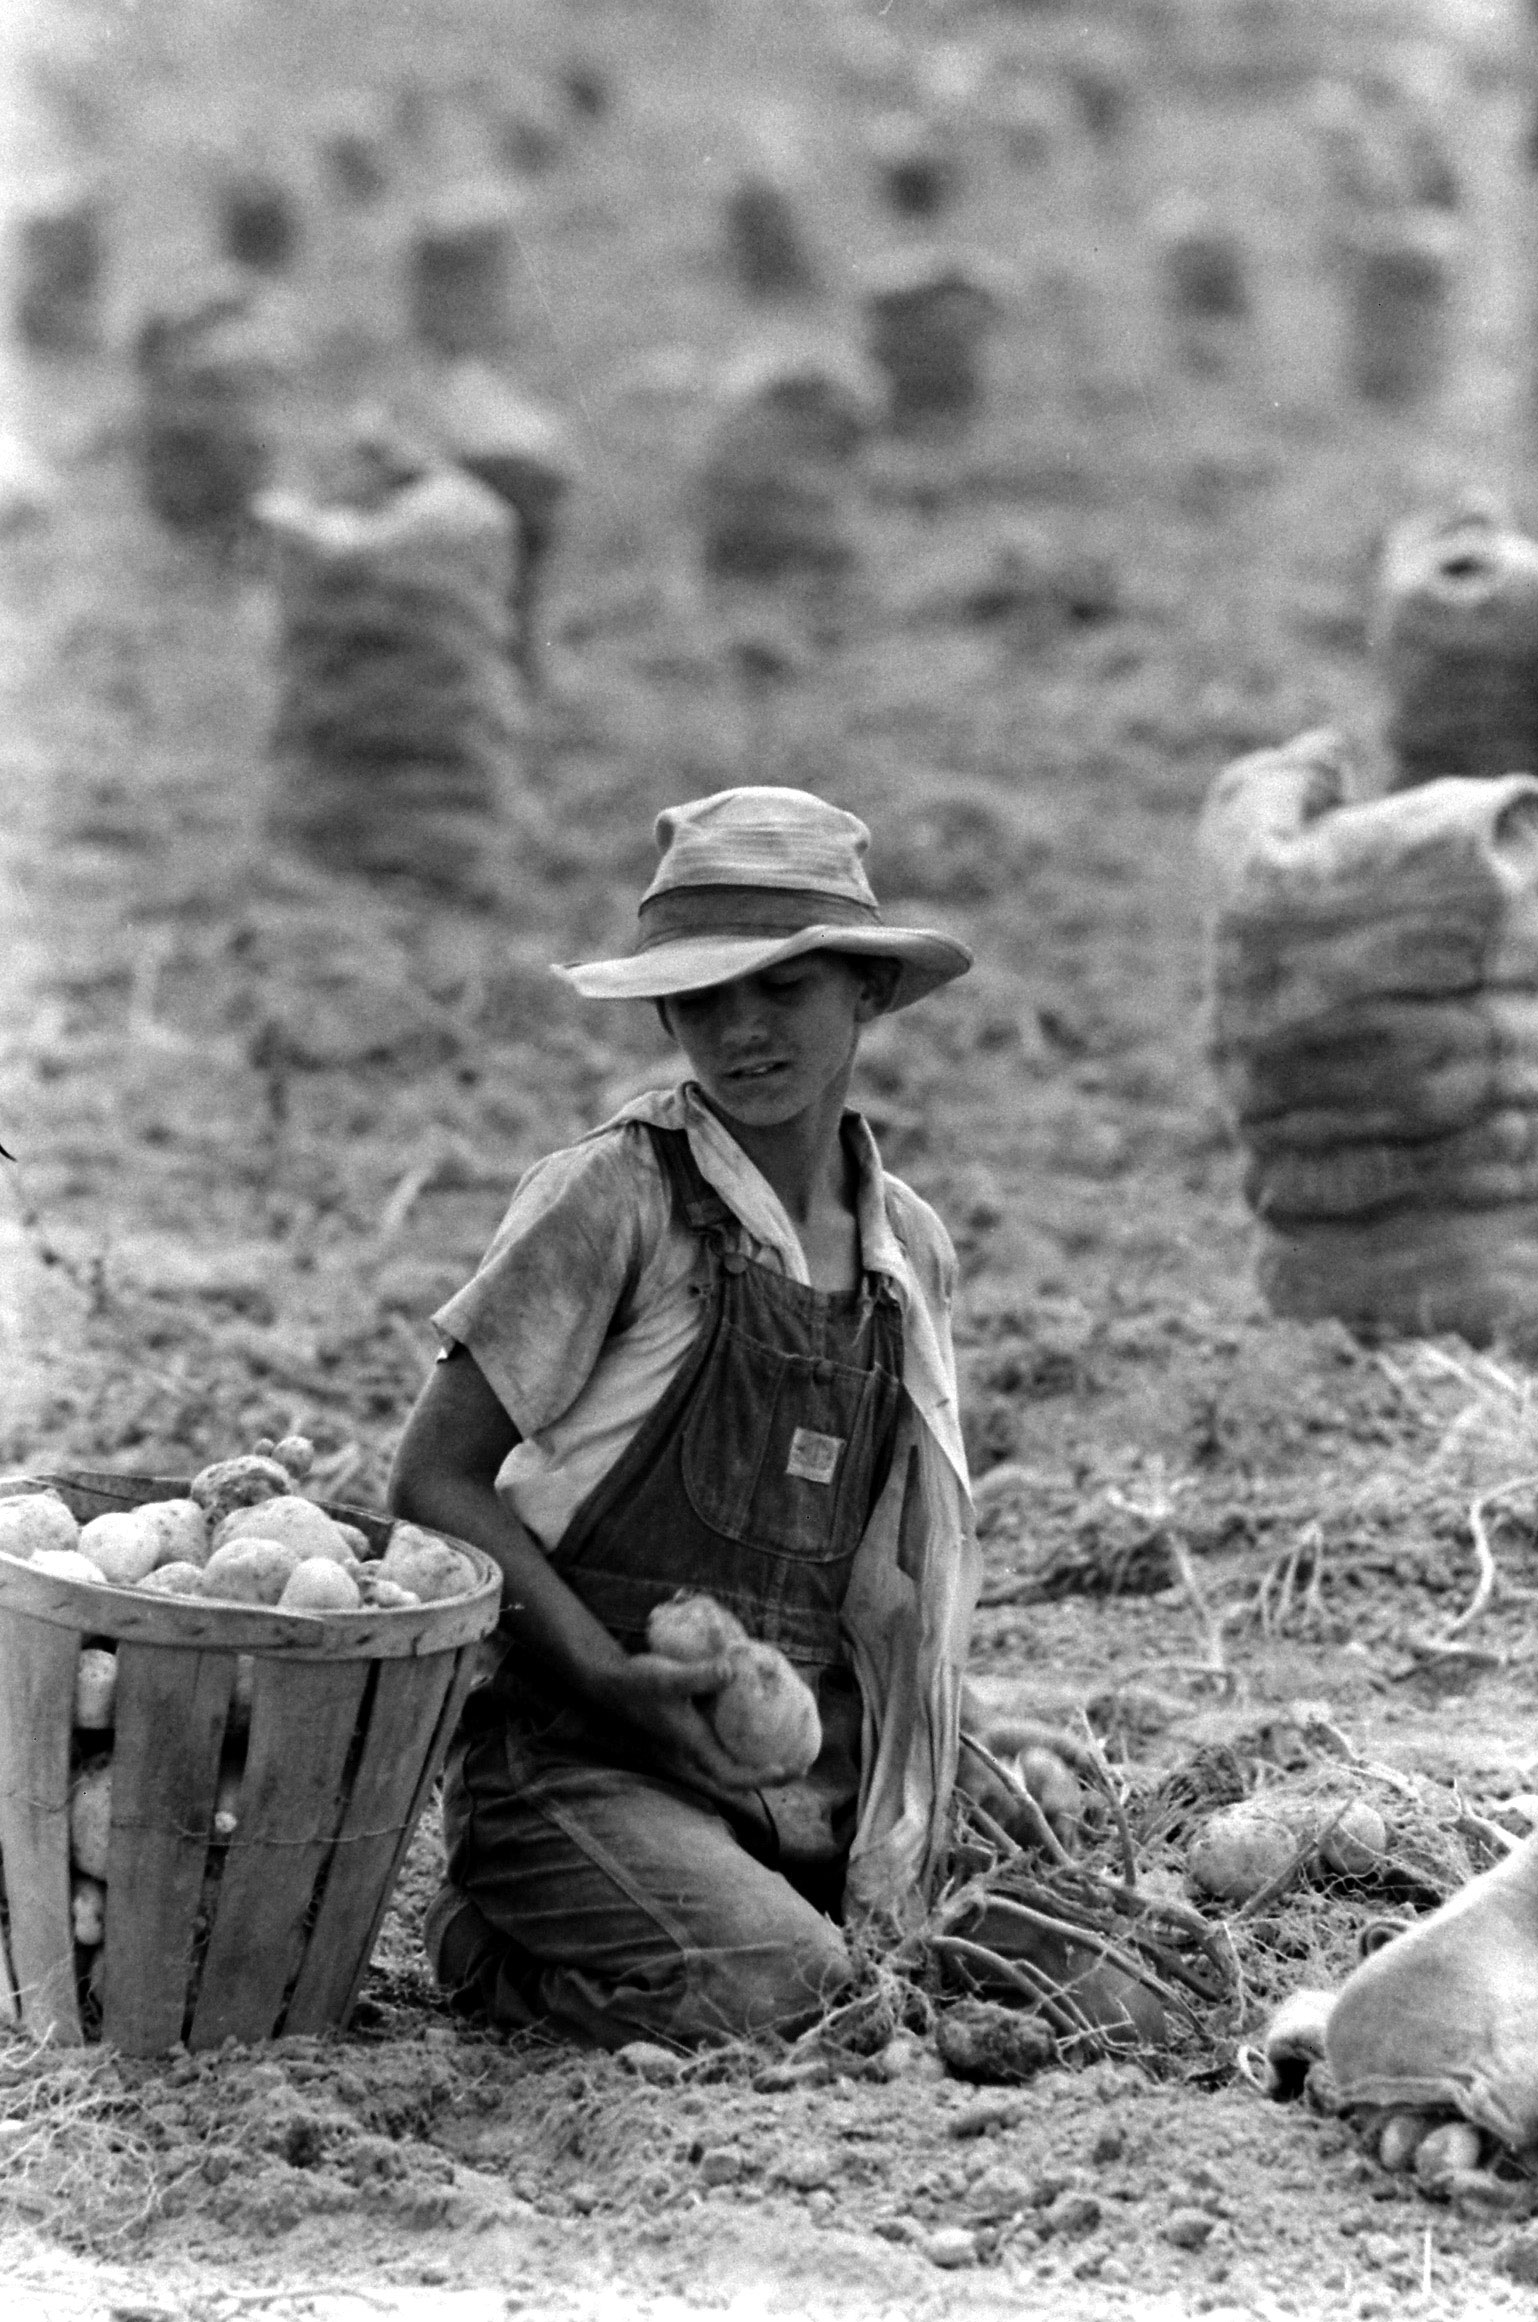 Migrant workers harvesting potatoes, USA, 1959.